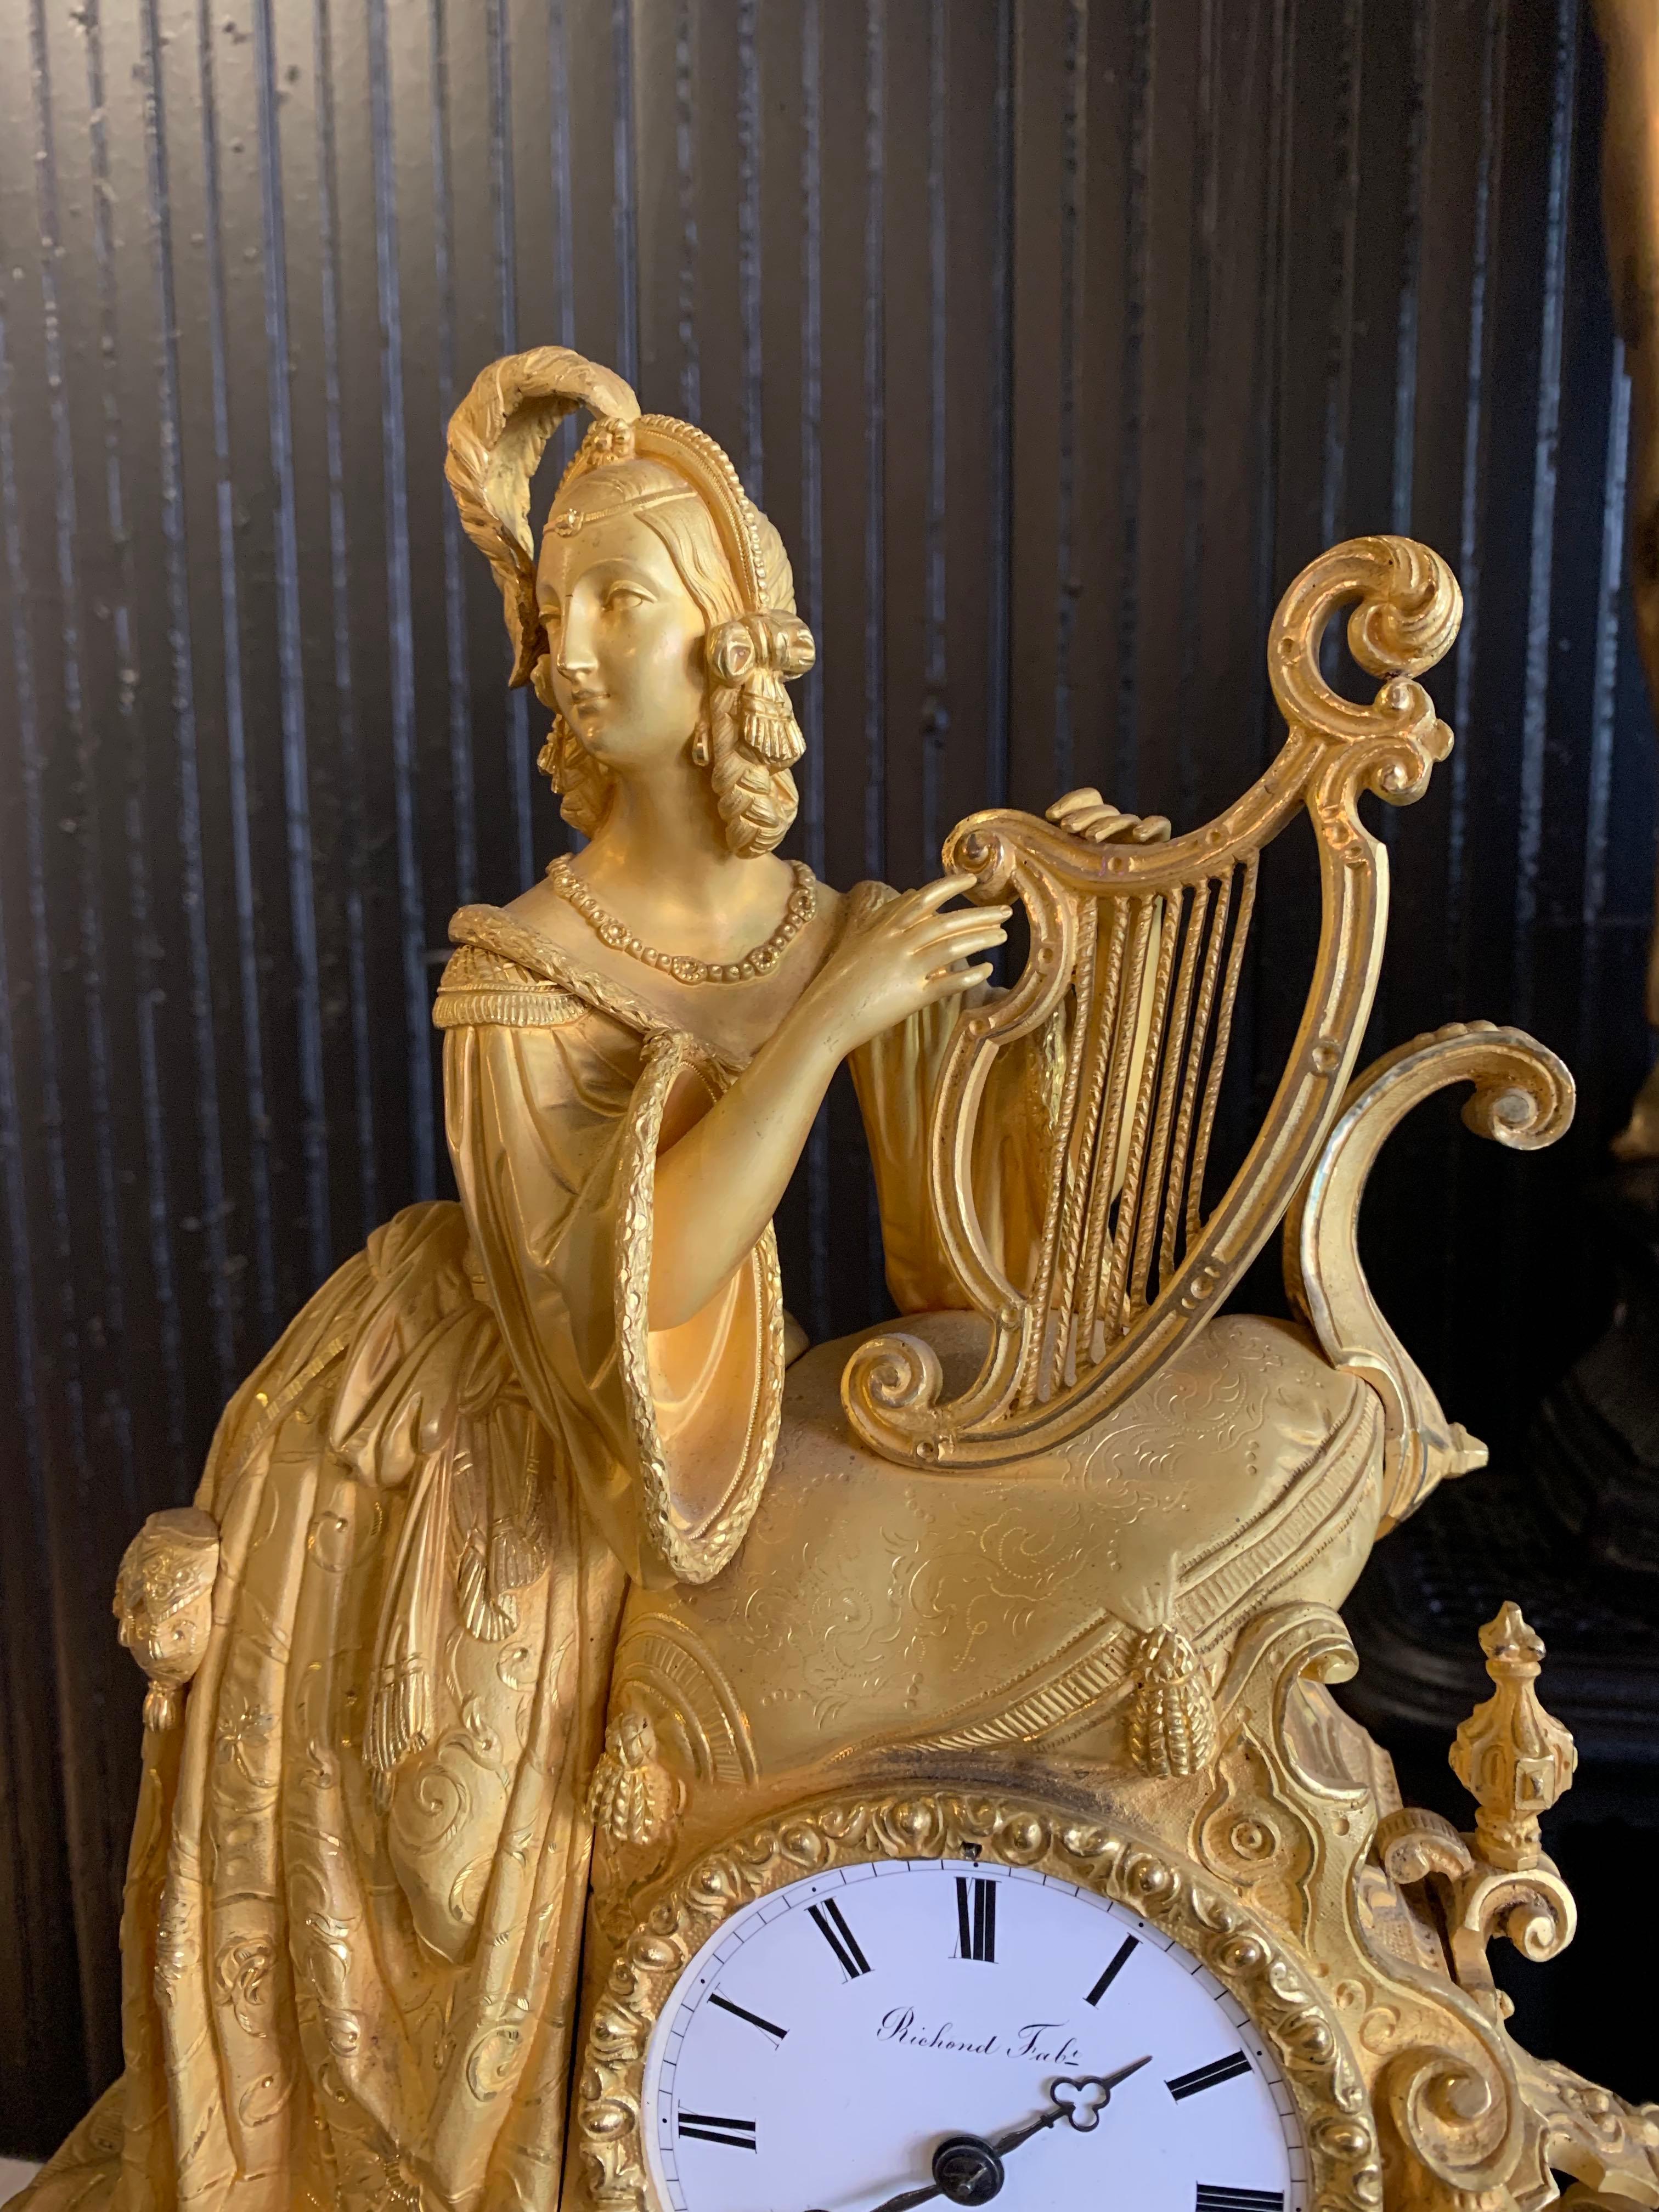 Louis XVI Rococo style ornate mantle clock with figure of an 18th century dressed woman playing the harp.